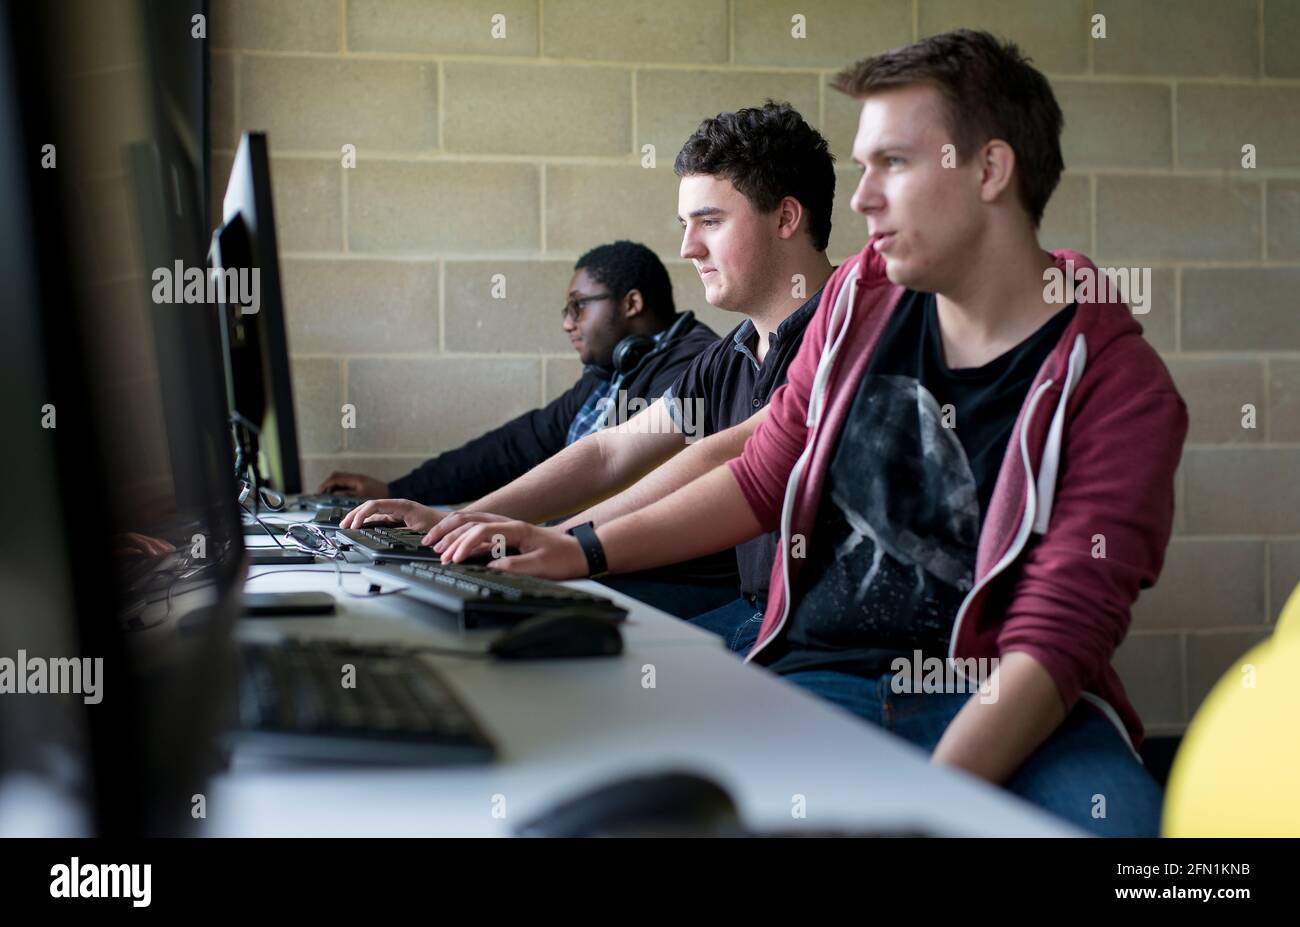 Sixth Form Students, Young people in education, two teenagers collaborating at screens, 3 young males in 6th Form working together Stock Photo